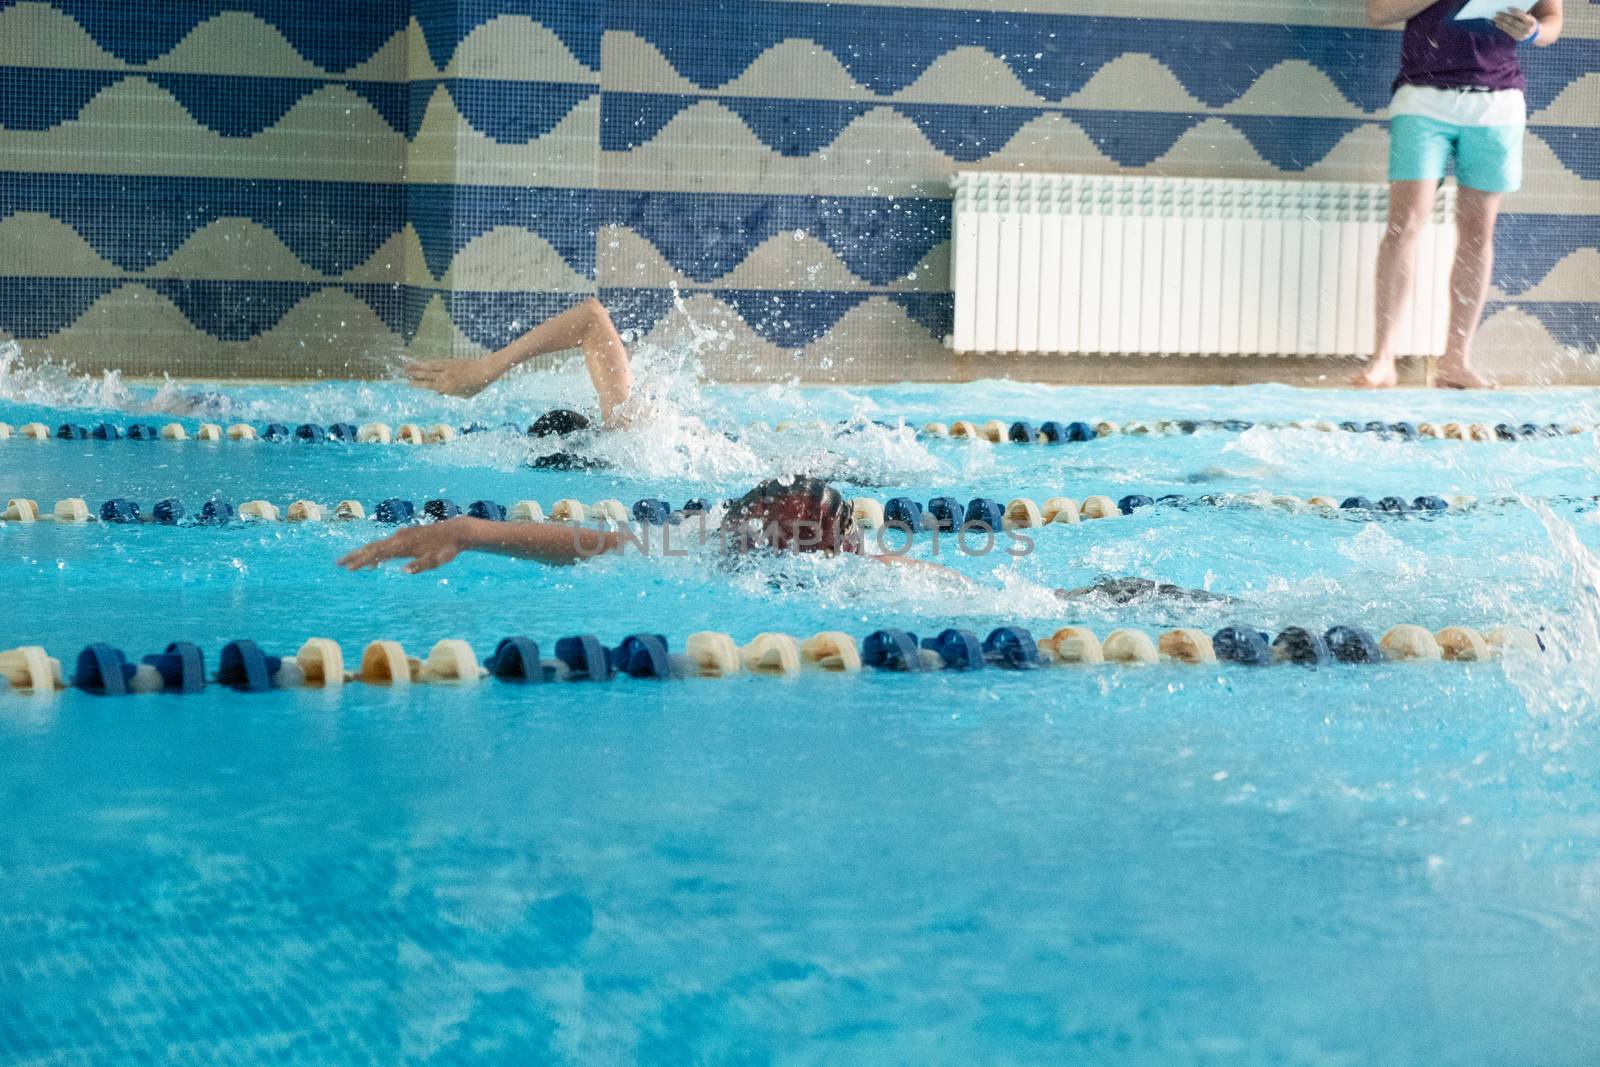 Children swimming freestyle. Indoor swimming pool with clear blue water.